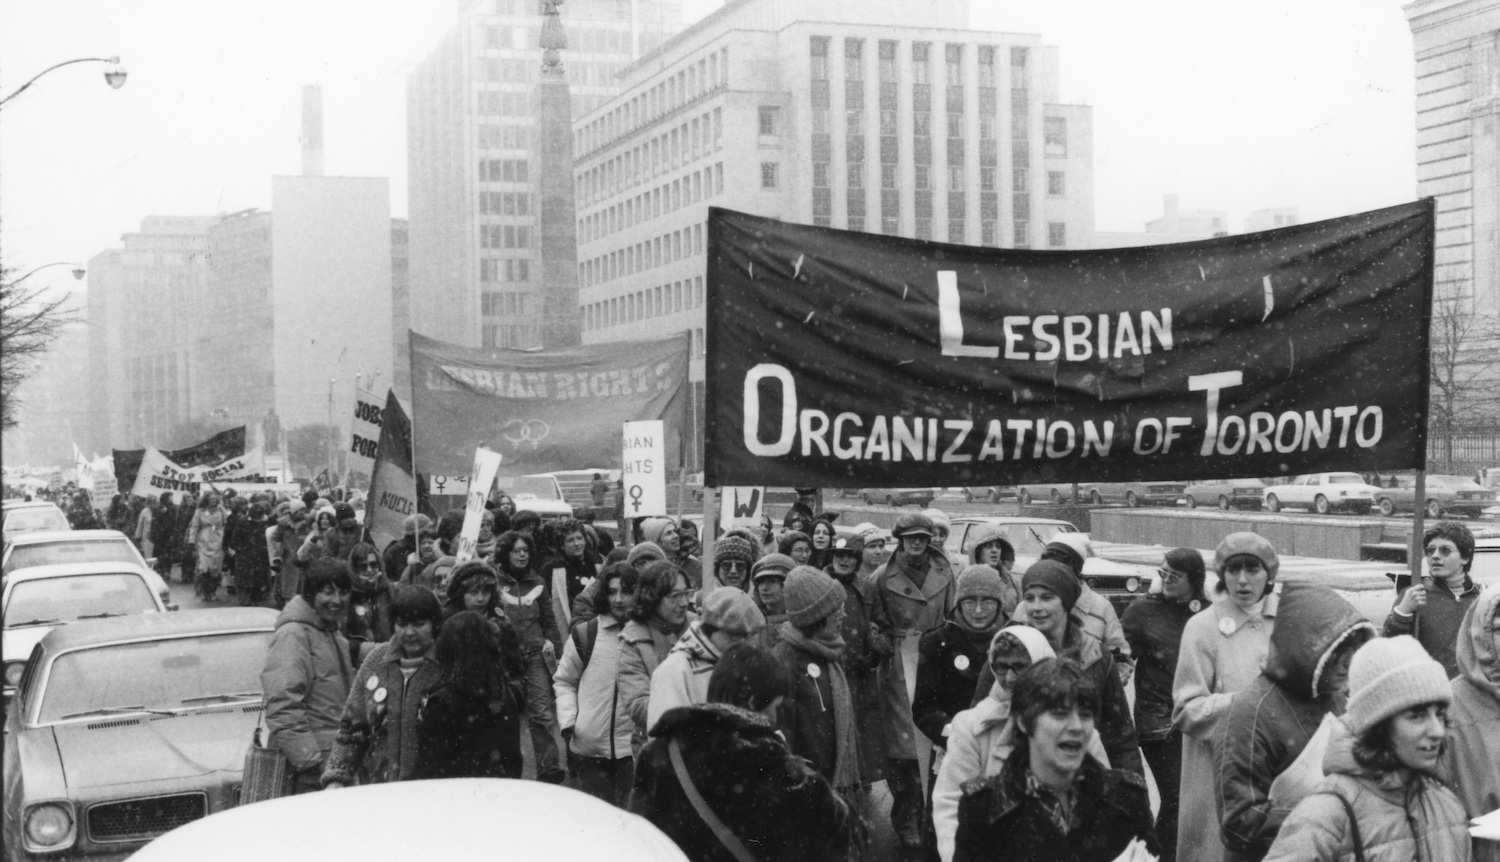 Lesbian Organization of Toronto (LOOT) marching for International Women's Day 1980. Photograph by Gerald Hannon